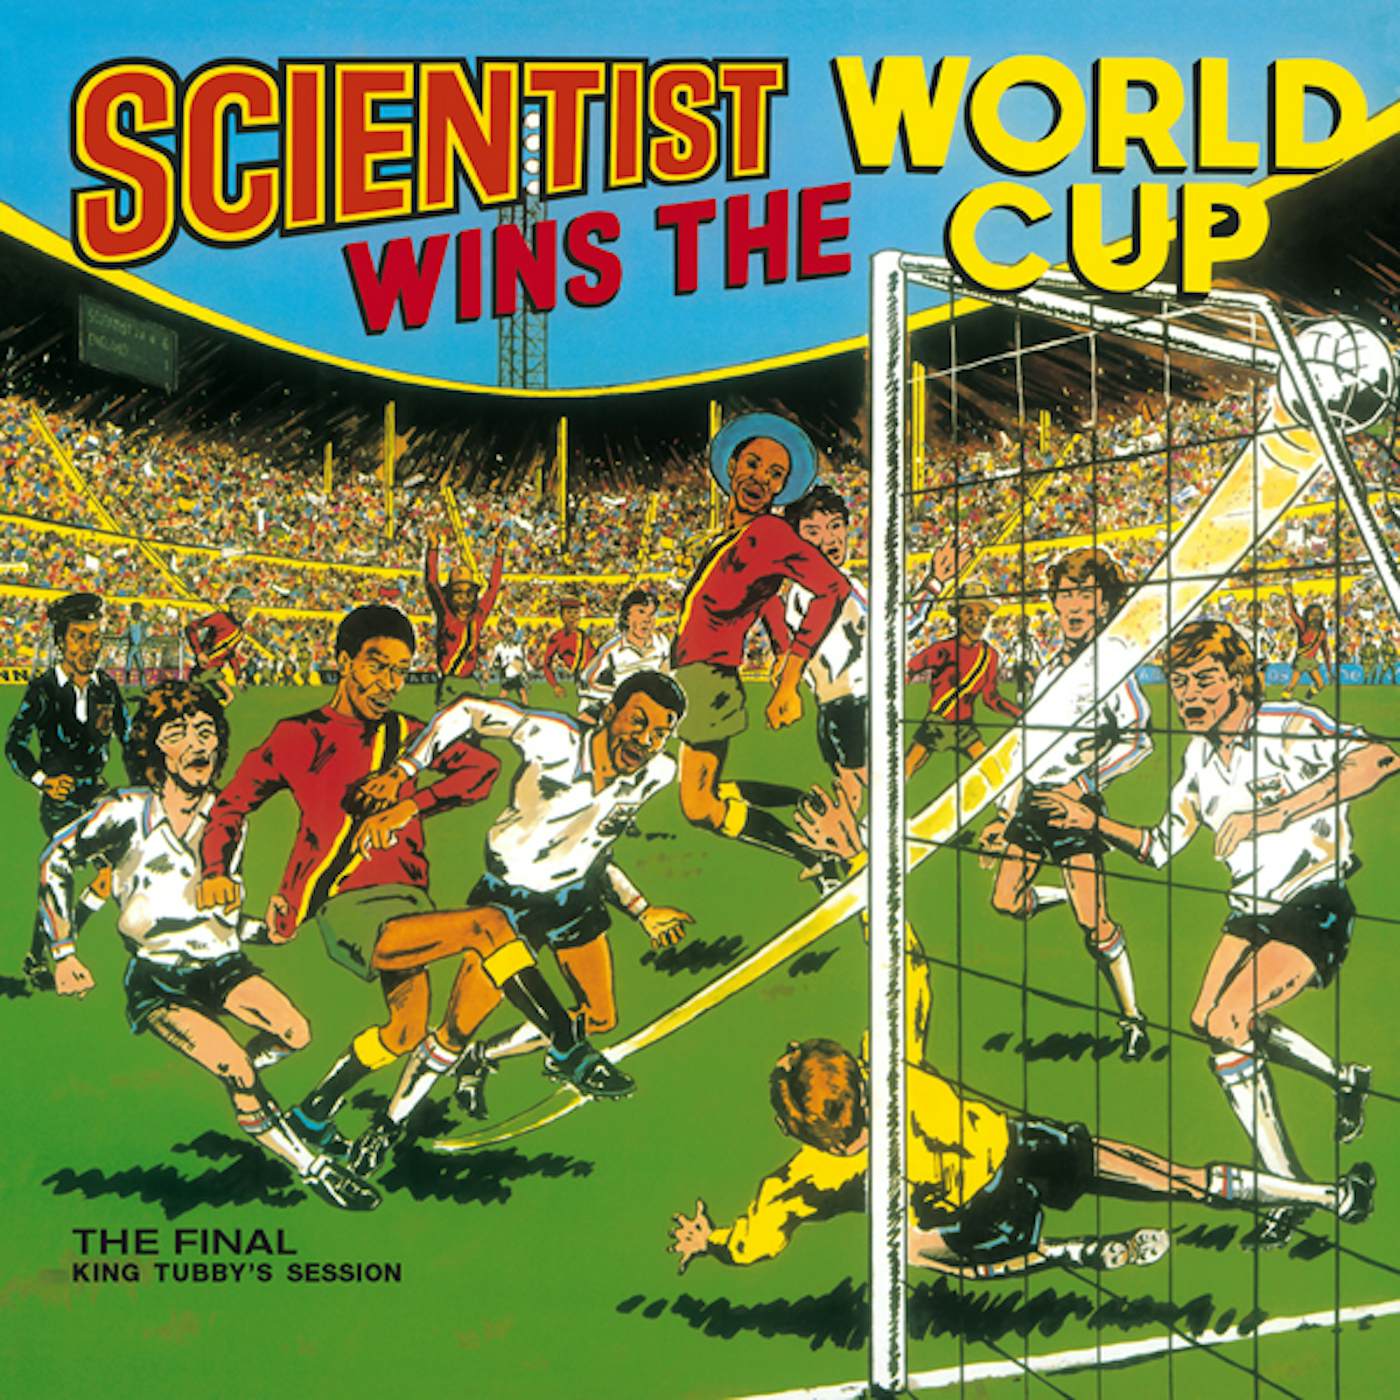 Scientist WINS THE WORLD CUP CD